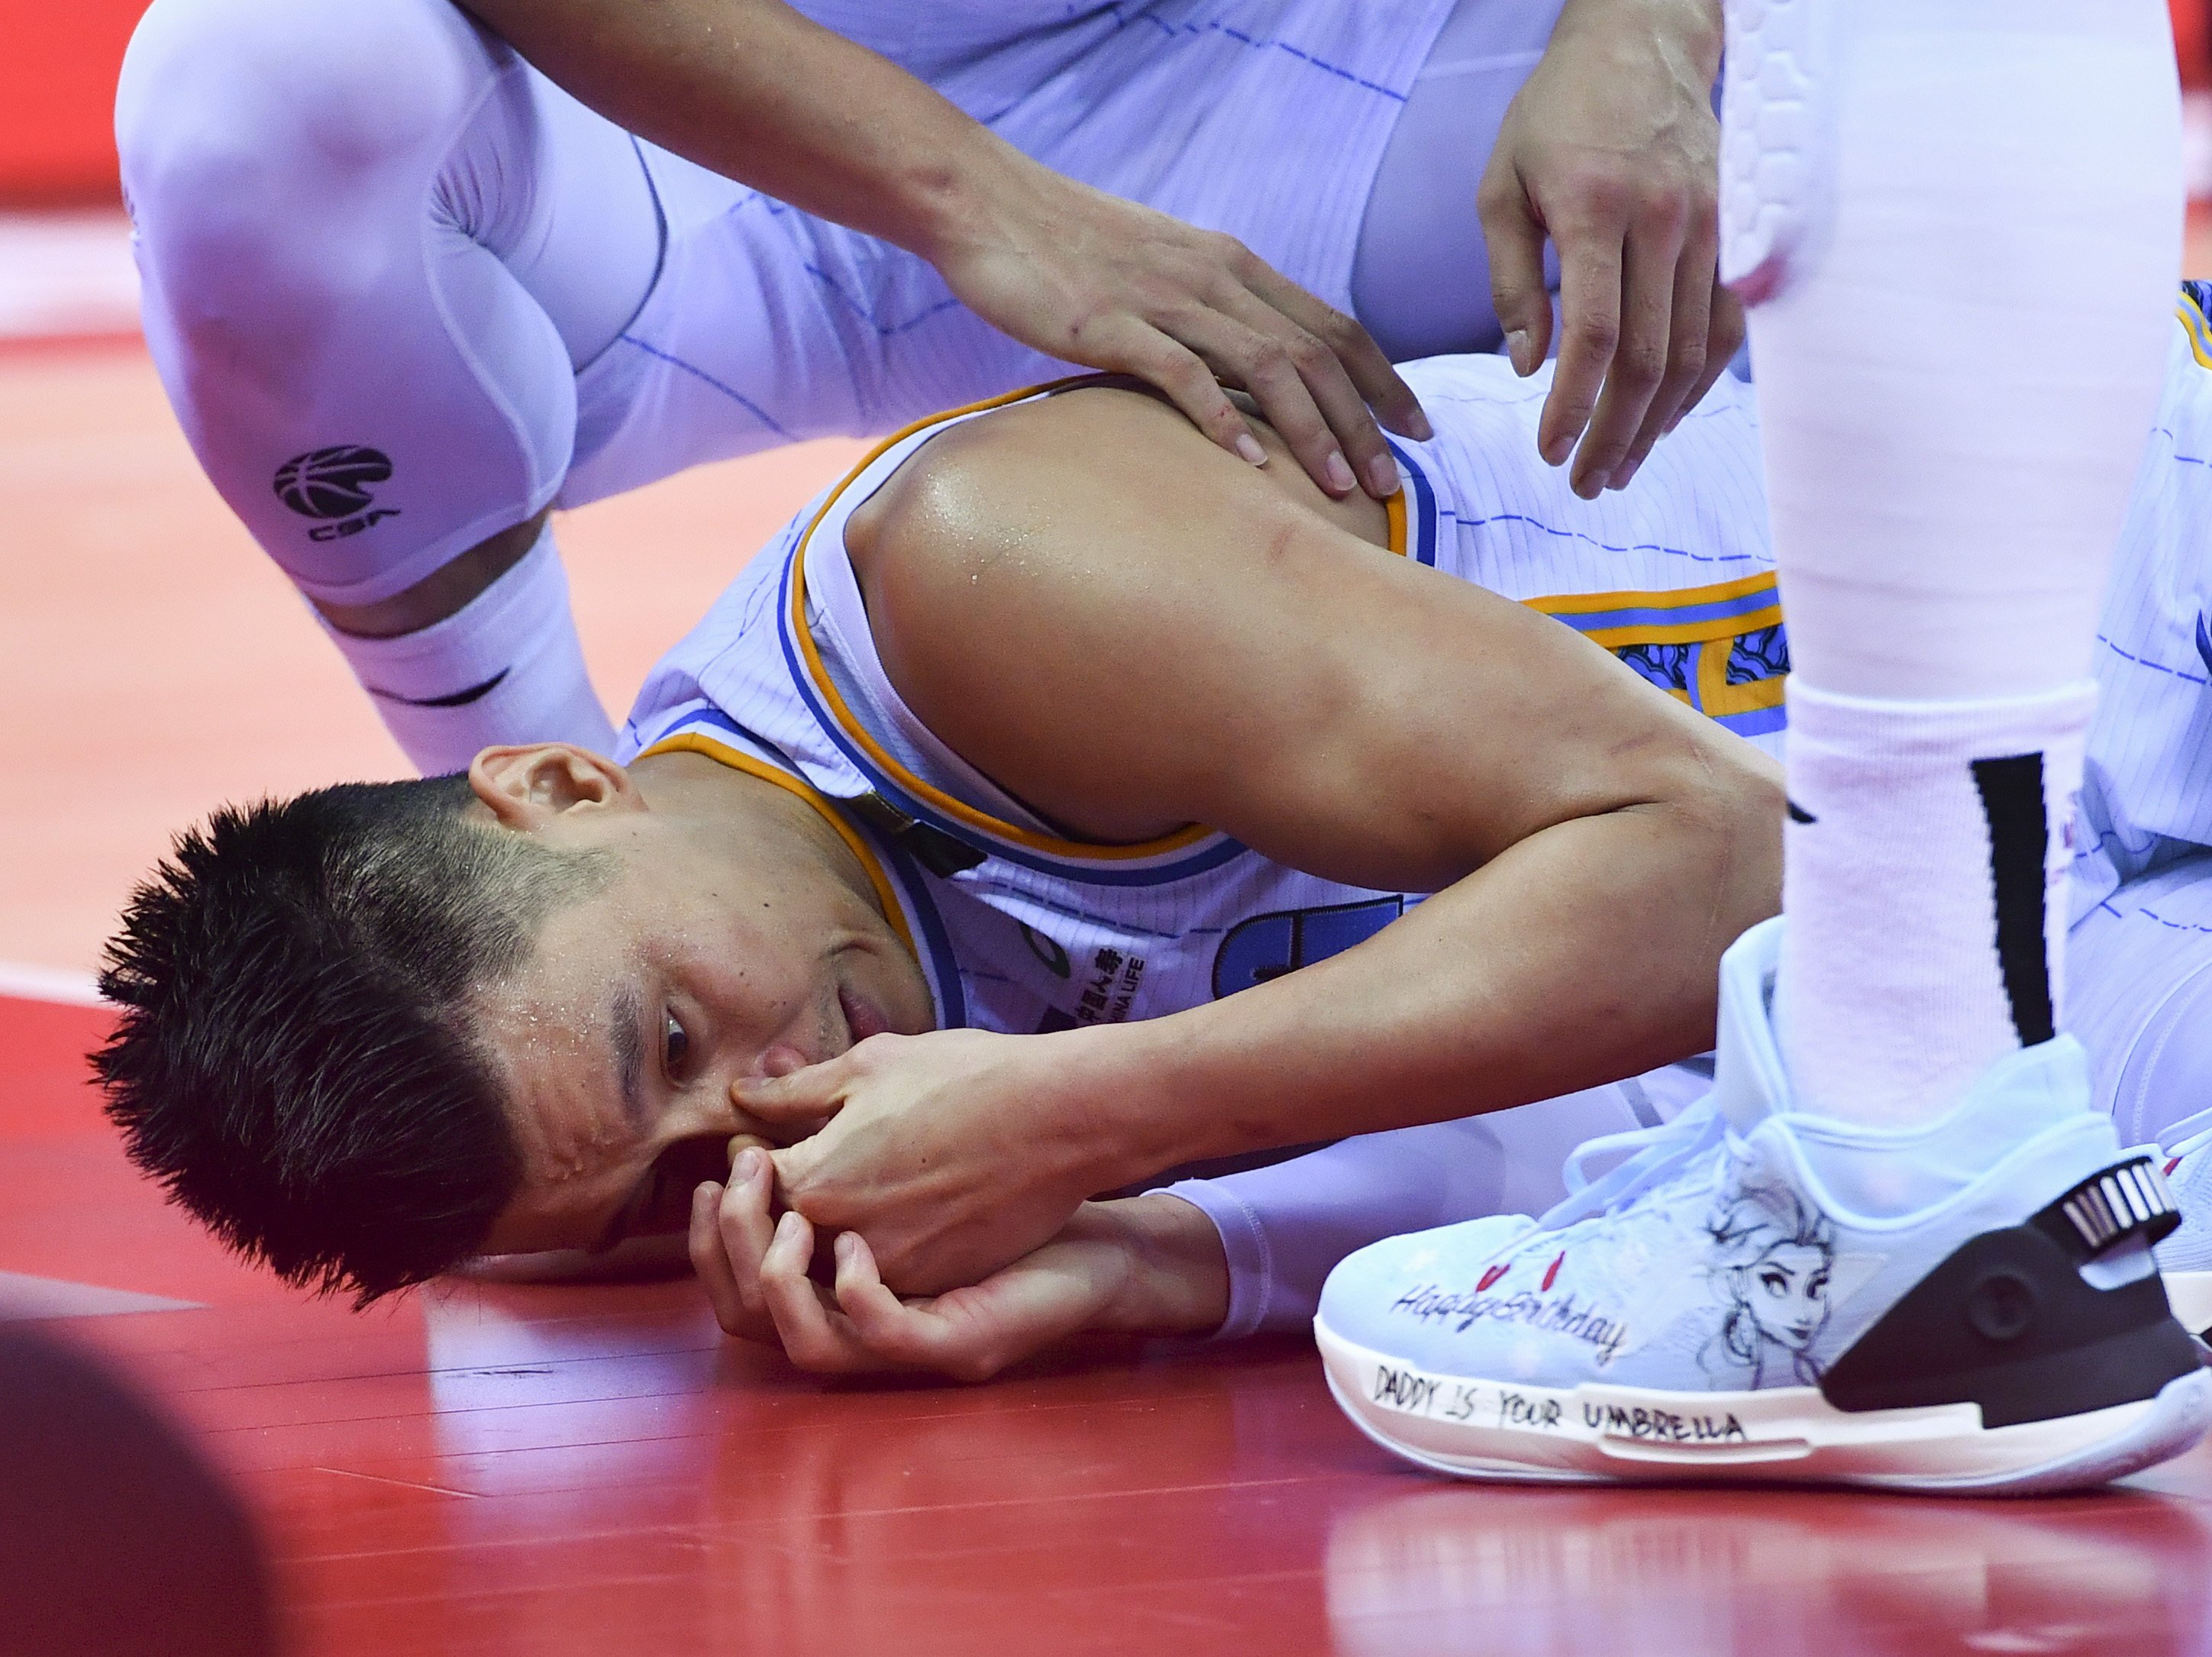 Jeremy Lin of the Beijing Ducks gets injured during the semi-final match against Guangdong Southern Tigers in the Chinese Basketball Association on August 6, 2020. Photo: Xinhua/Zhu Zheng